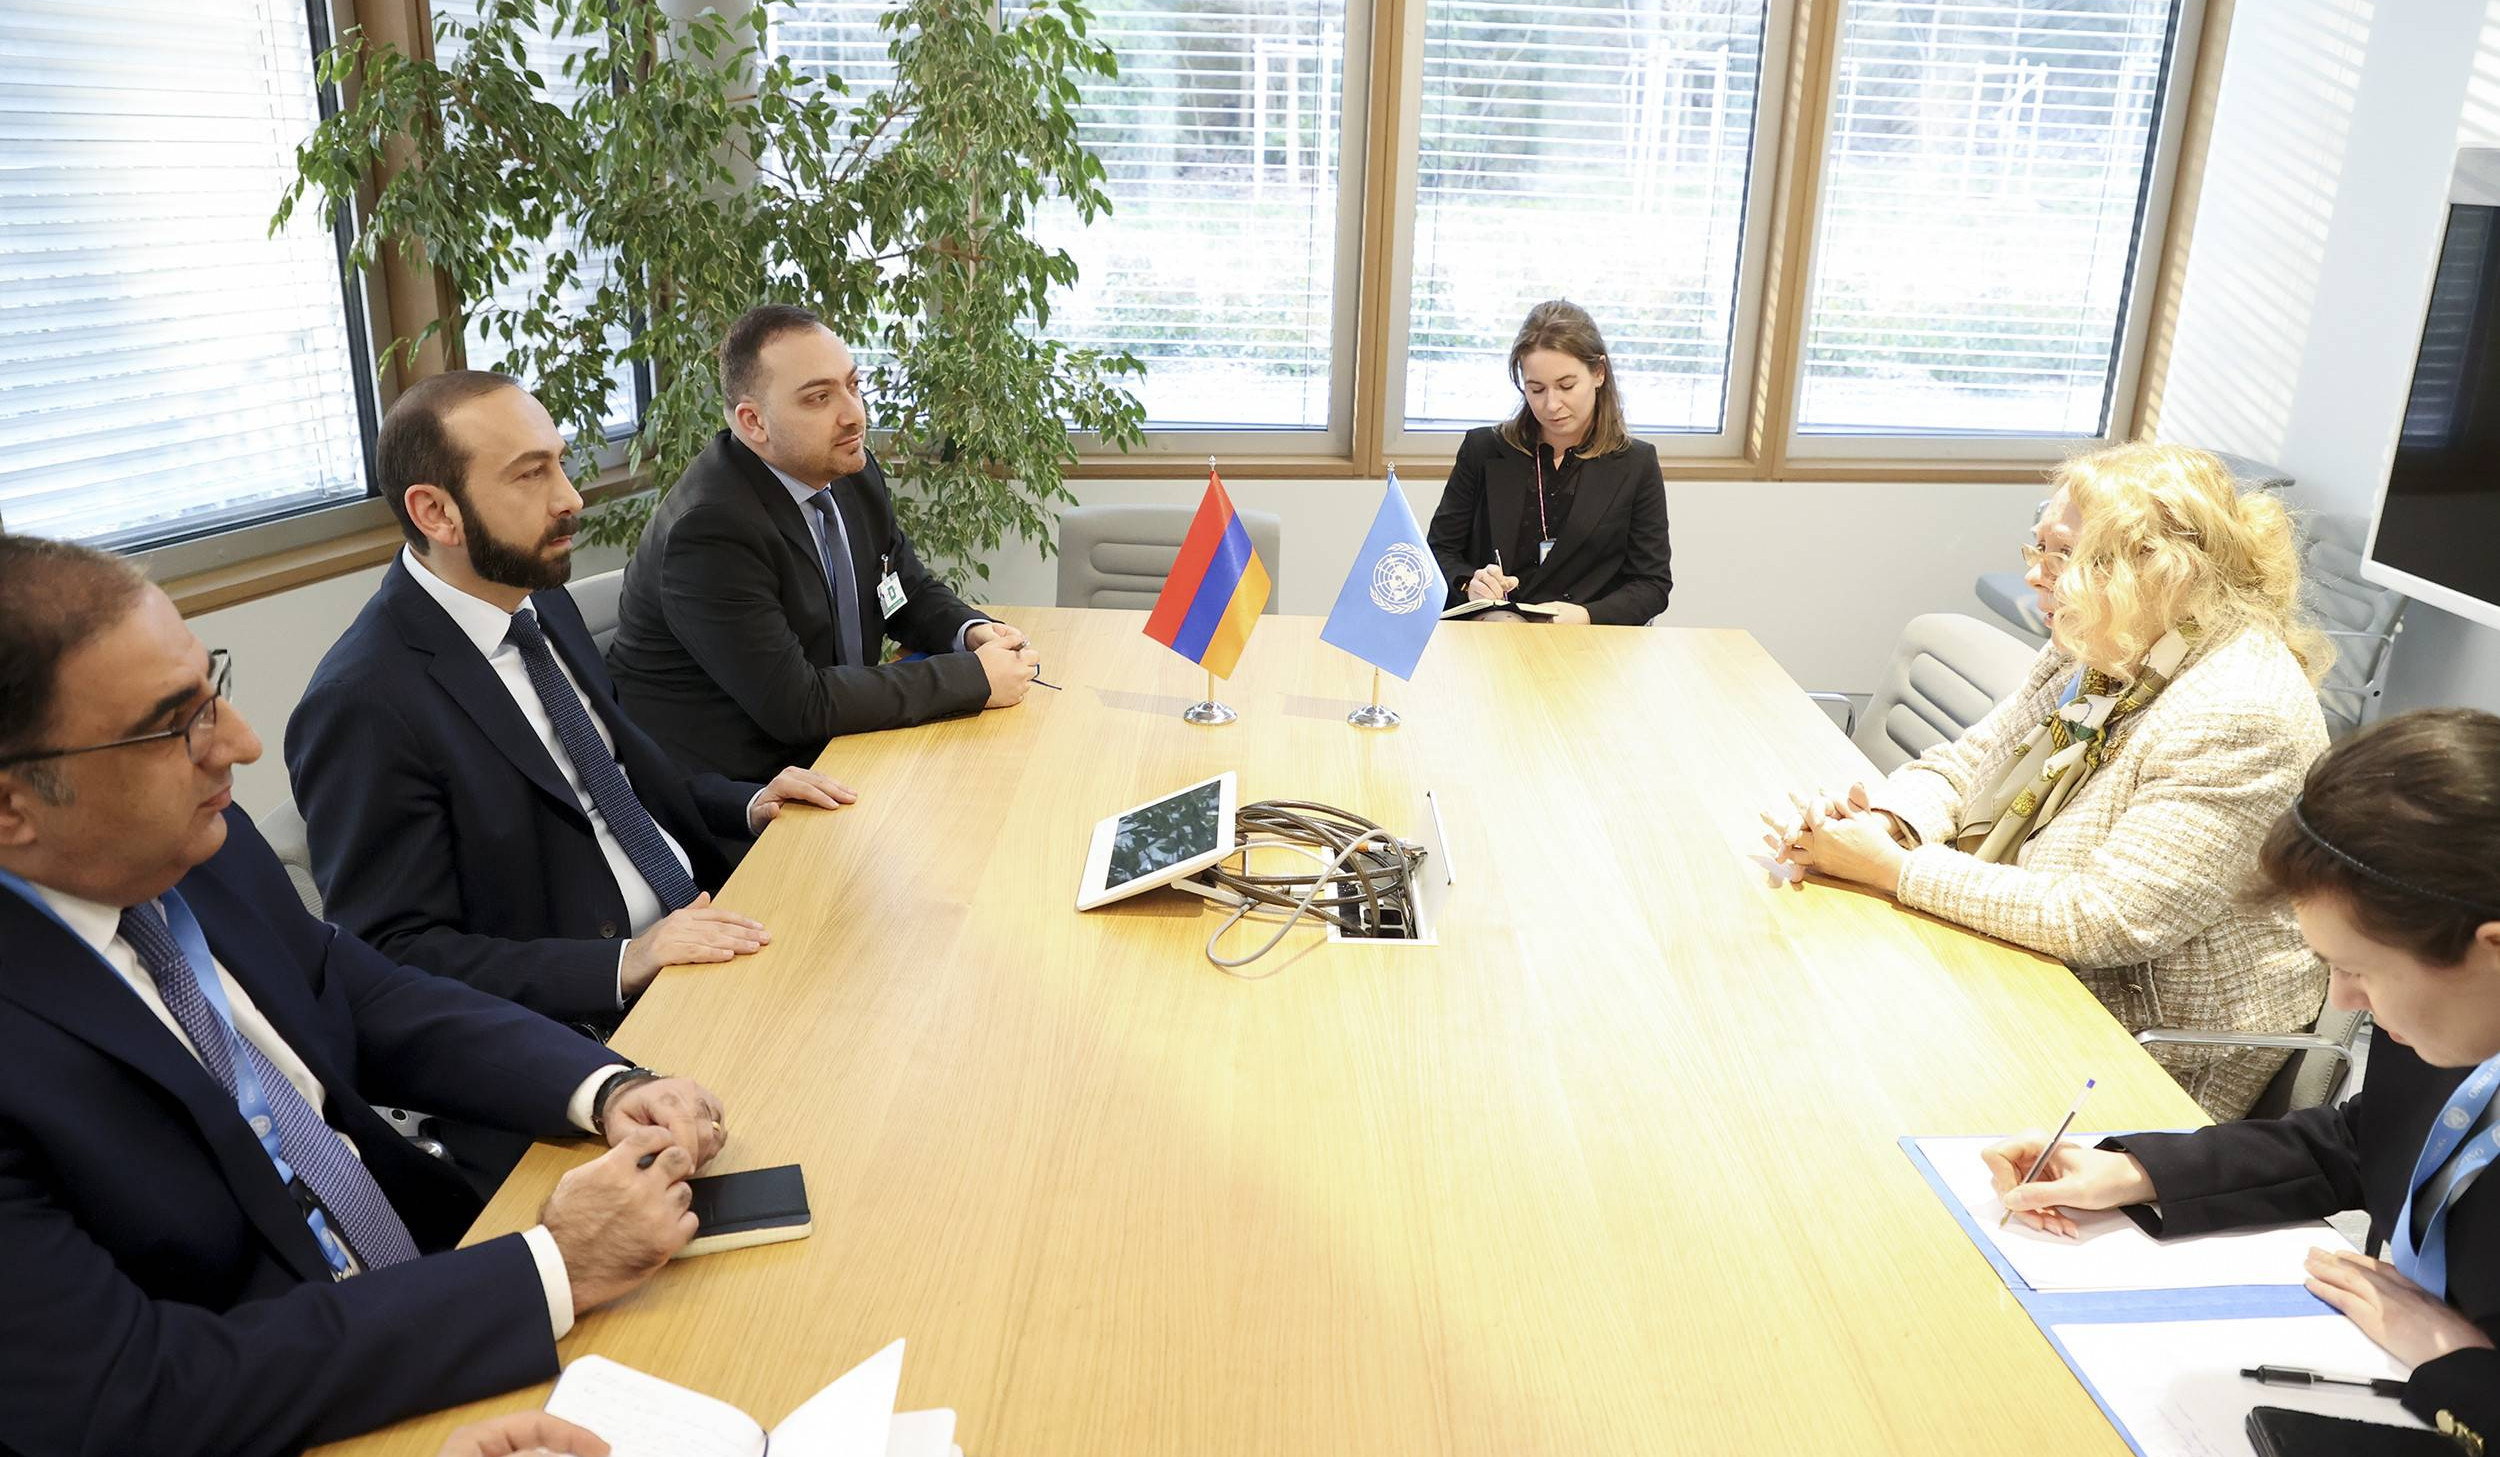 Ararat Mirzoyan drives Director-General’s of UN Geneva attention to the situation in the region resulting from the illegal blockade of Nagorno-Karabakh